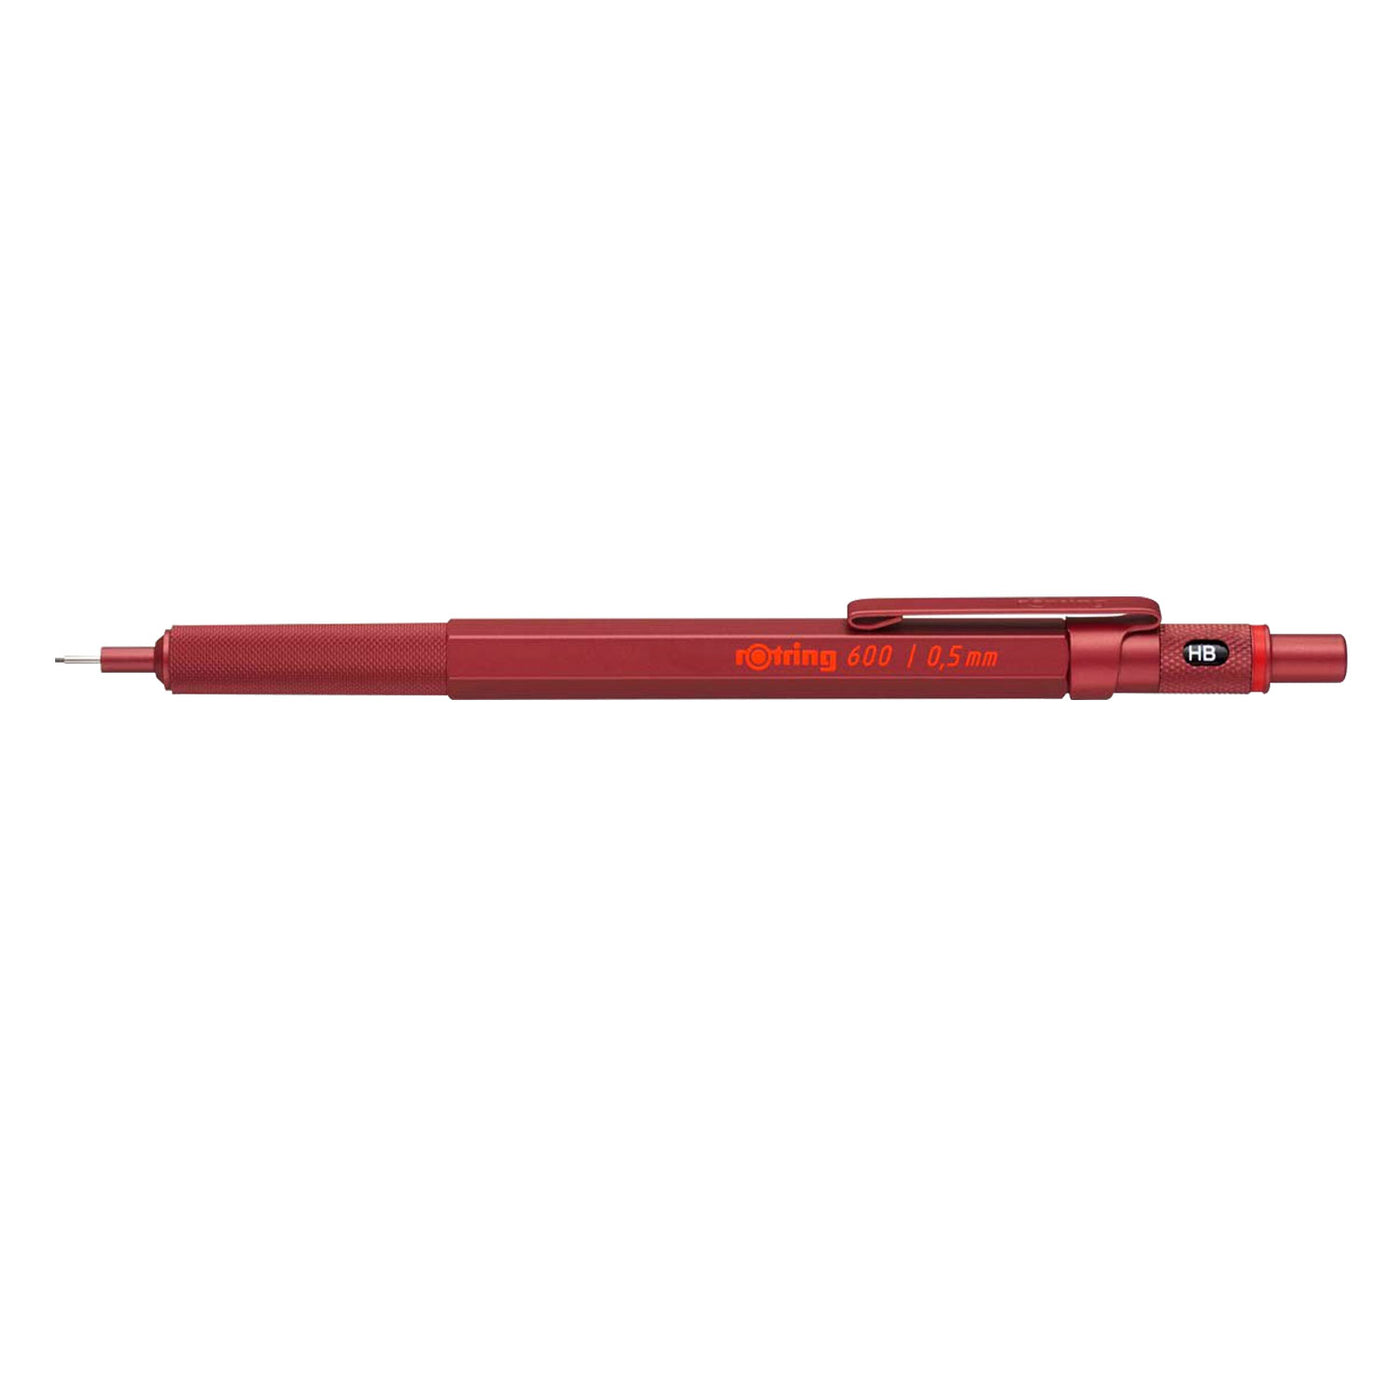 Rotring 600 0.5mm Mechanical Pencil - Red 3